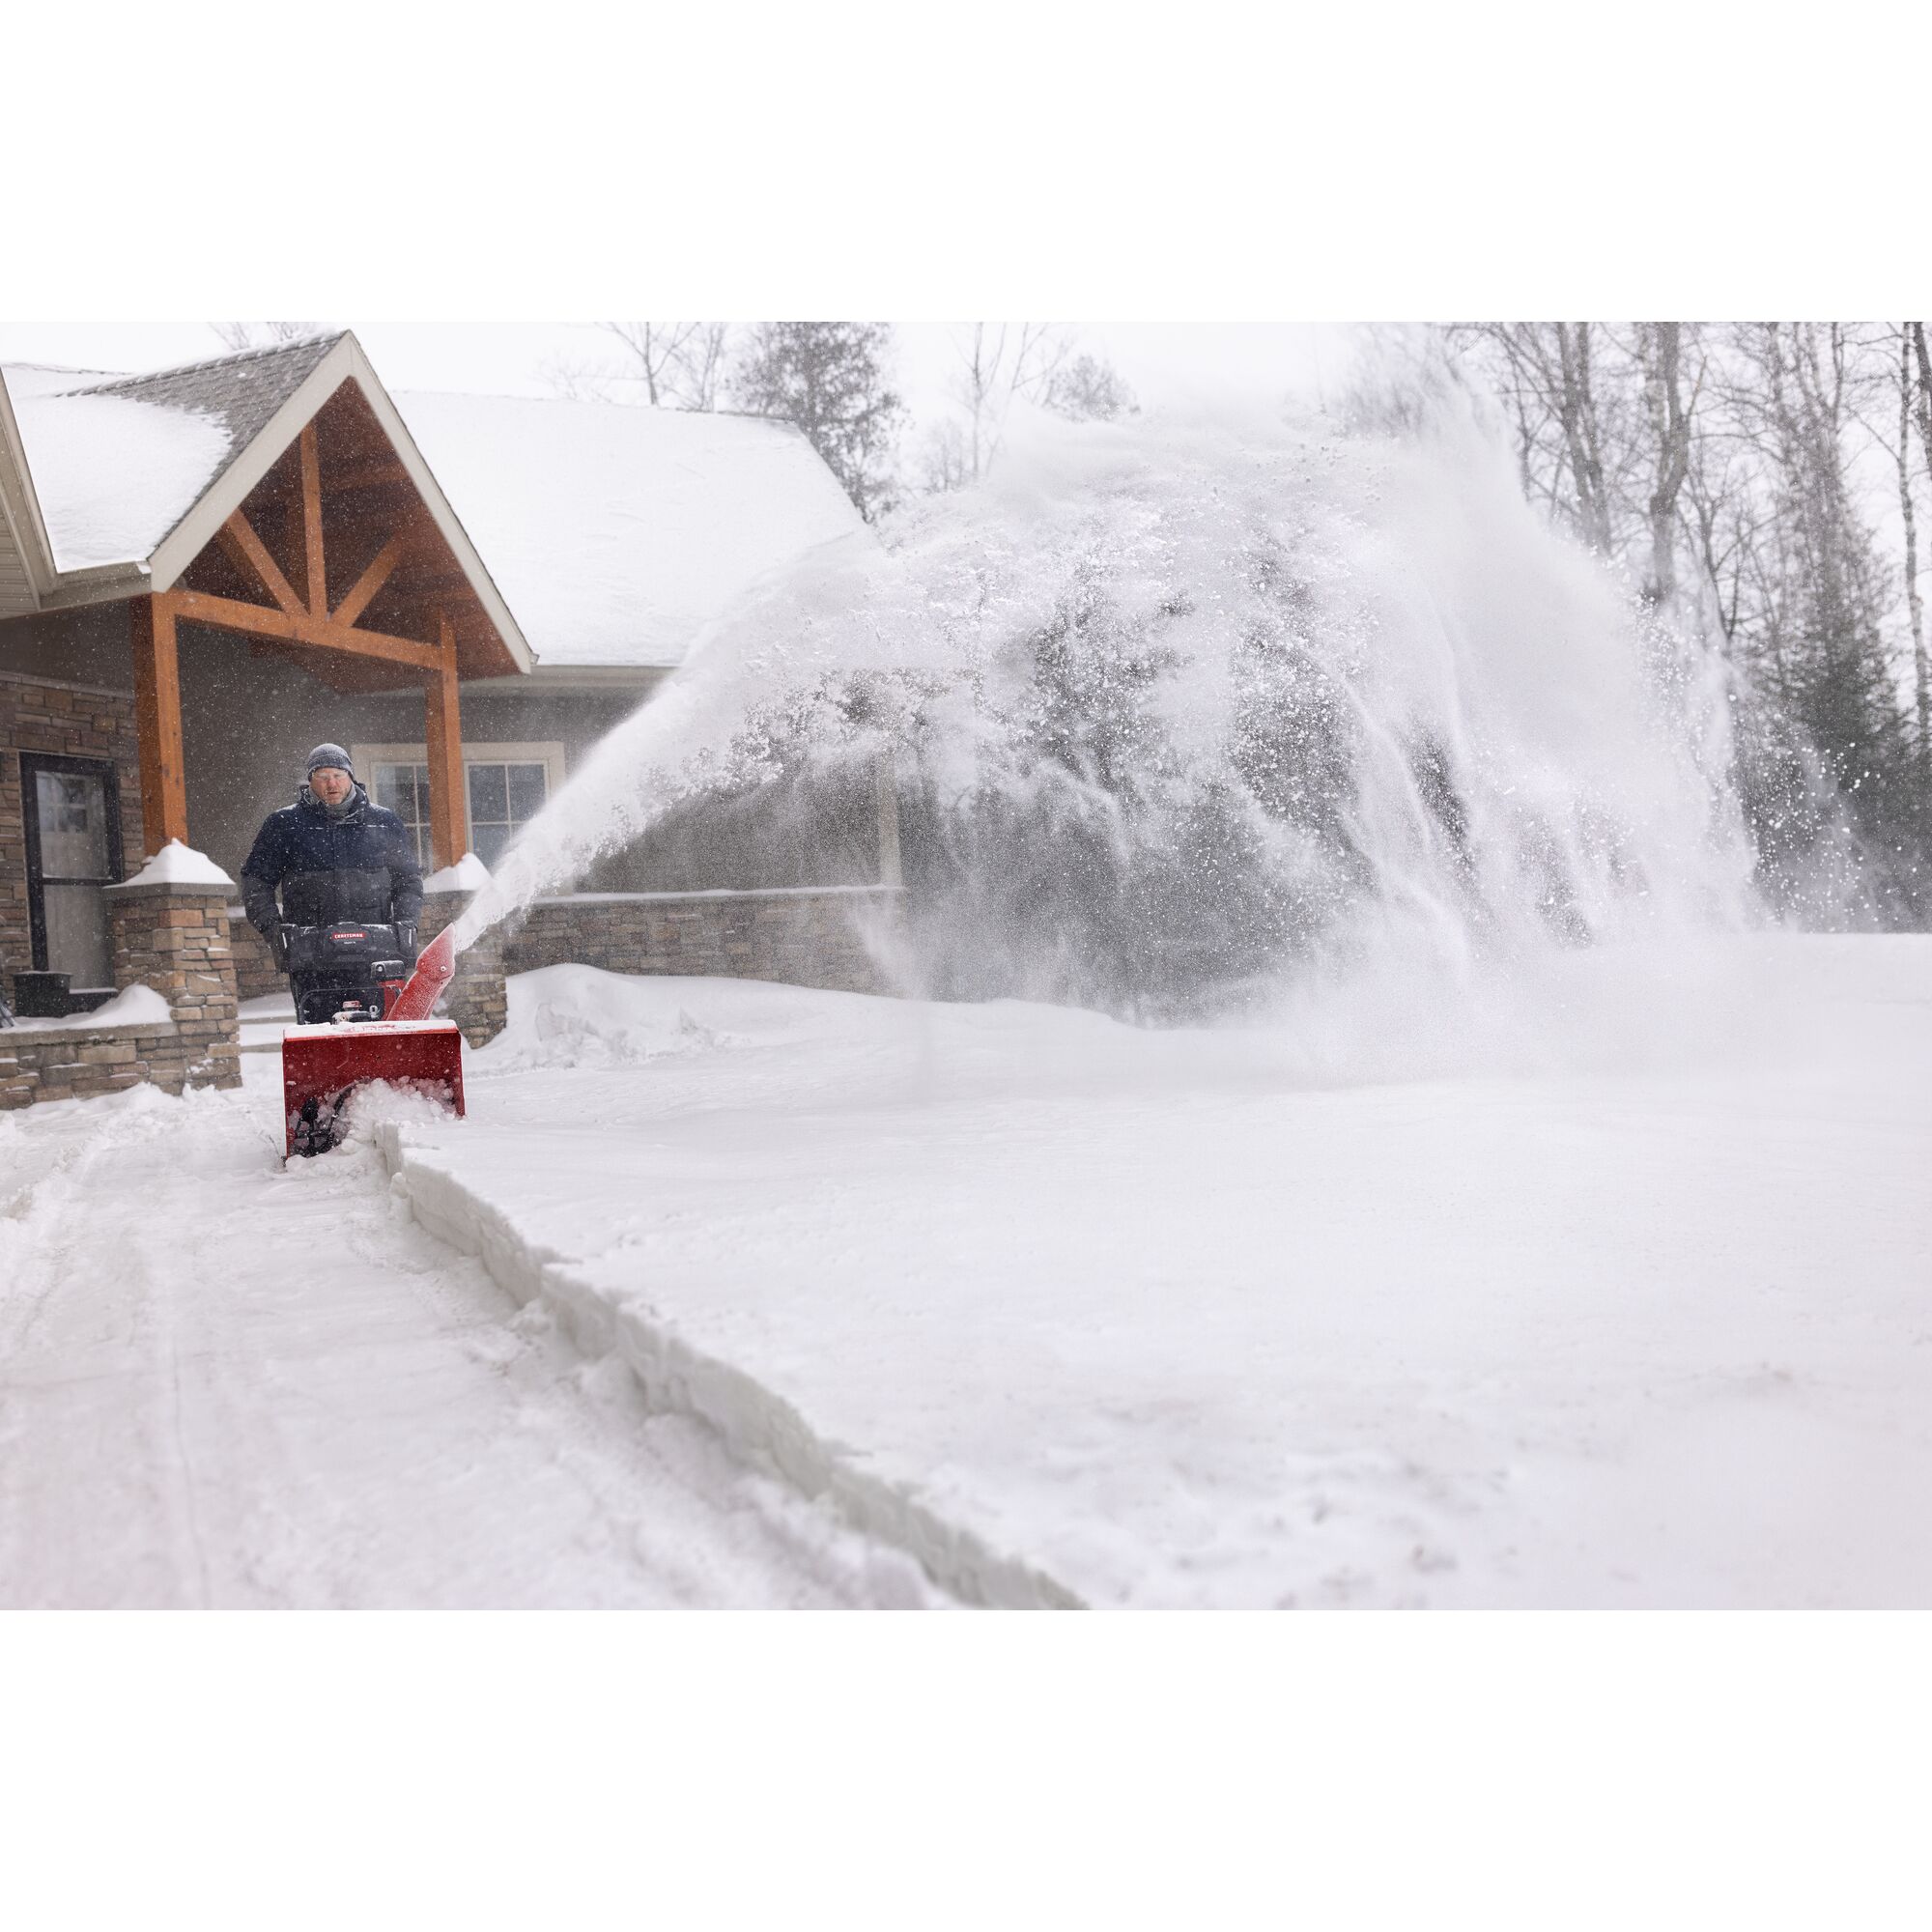 CRAFTSMAN Select 24 Snowblower clearing snow from sideway with house in background